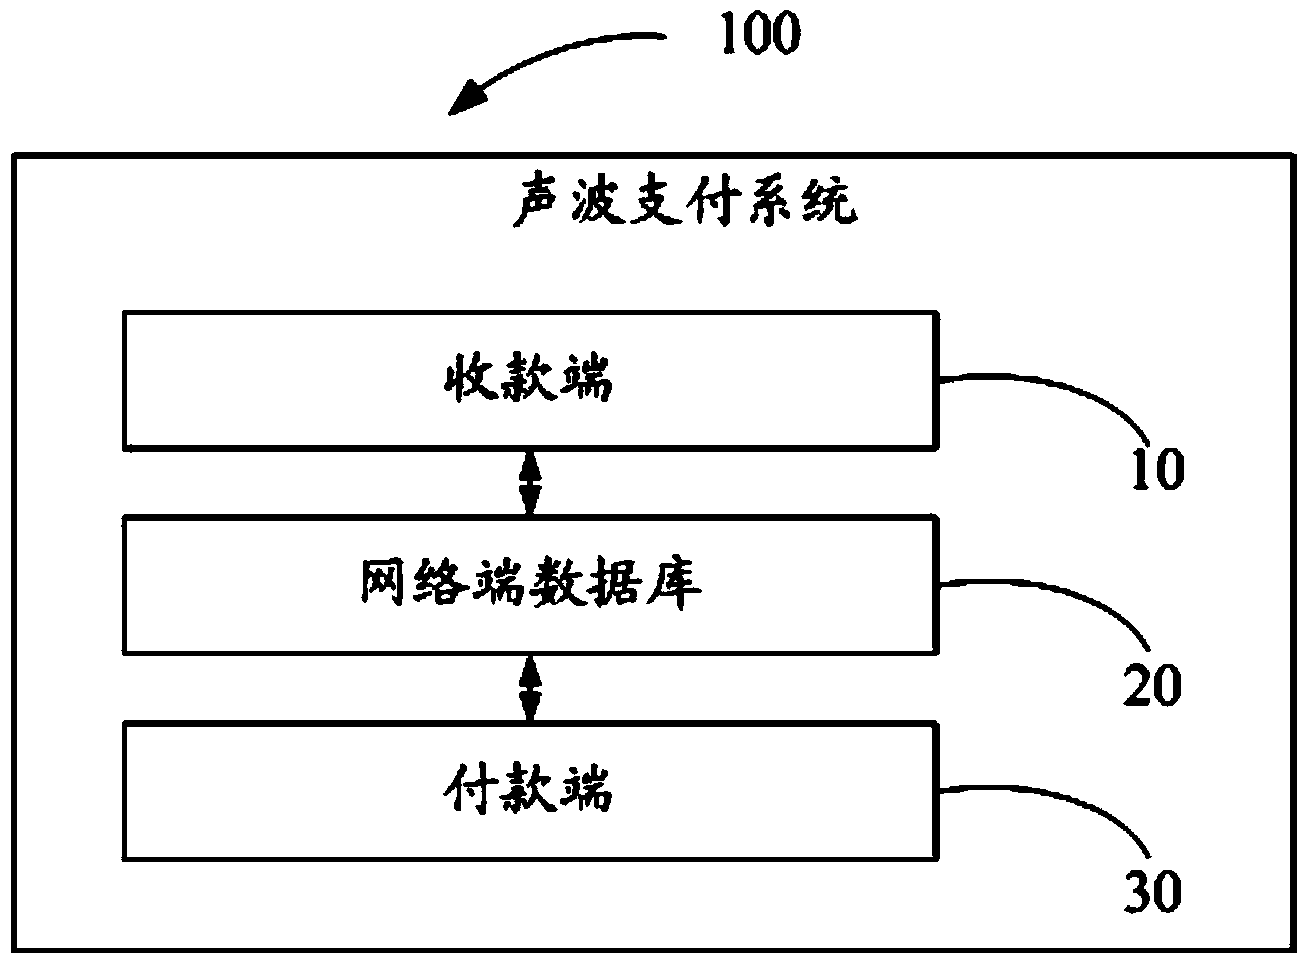 Sound wave safety payment method and system